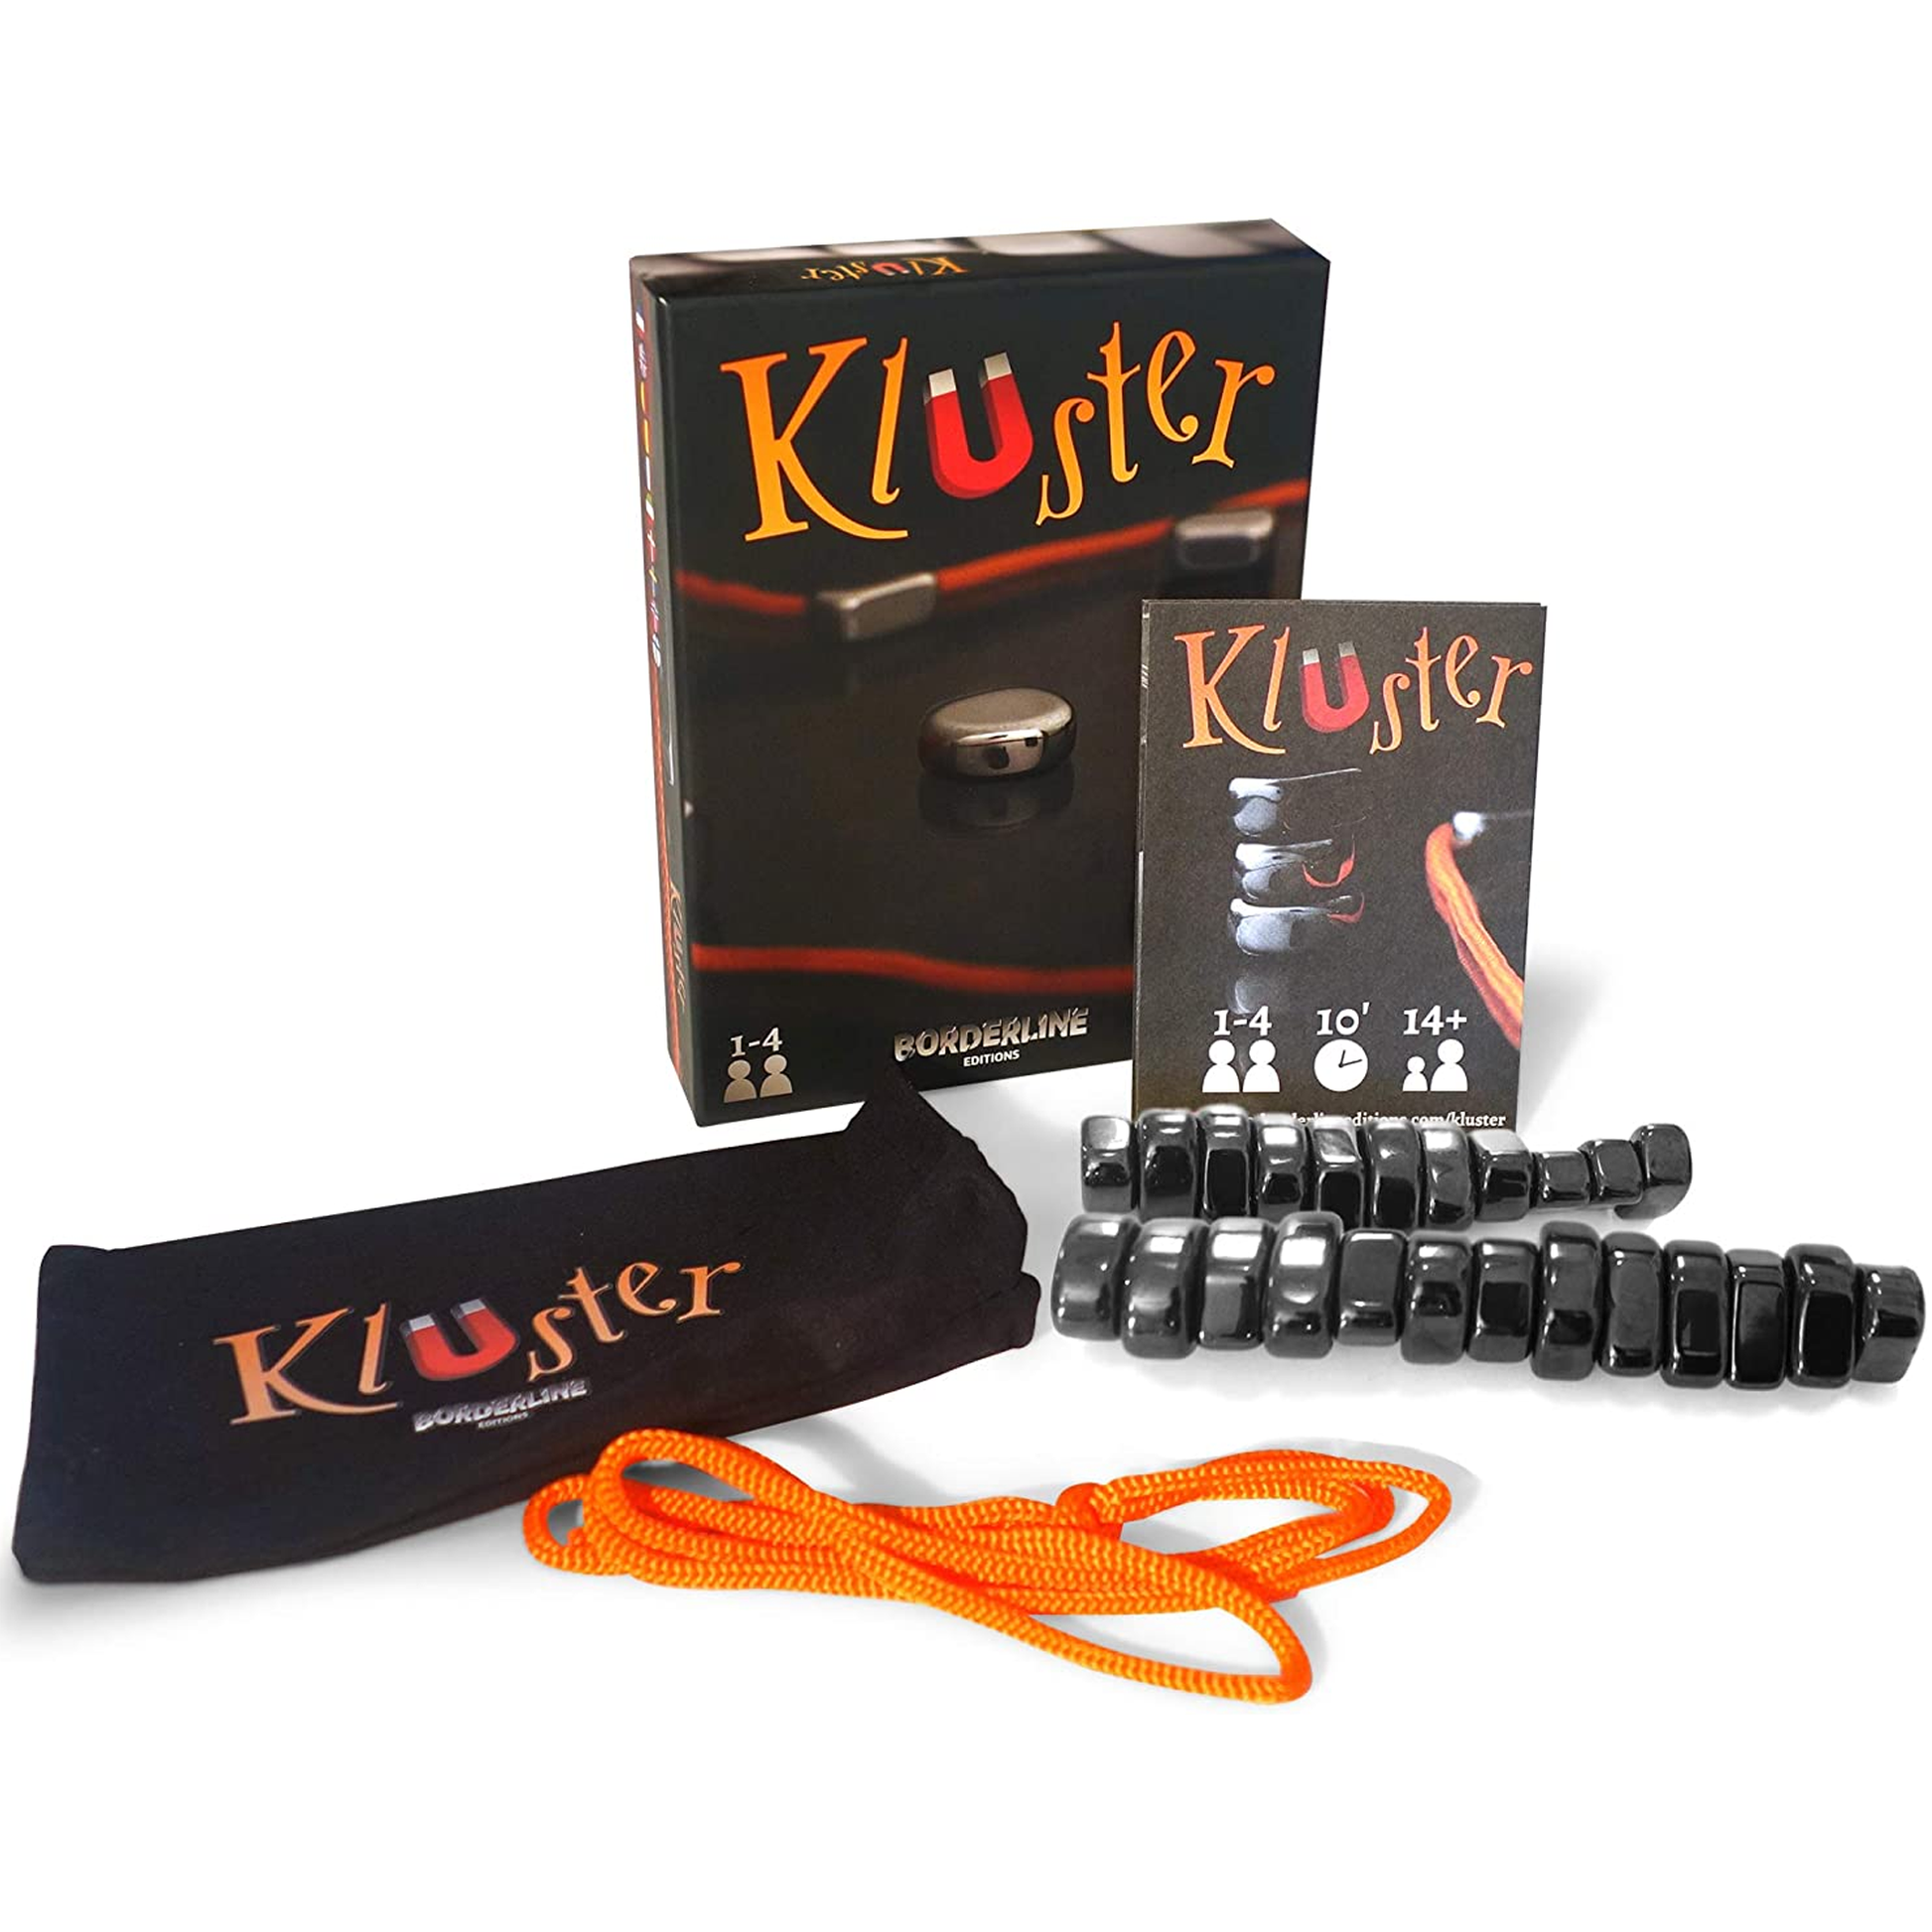 Kluster - A Magnetic Dexterity Board Game Box and Contents | Happy Piranha